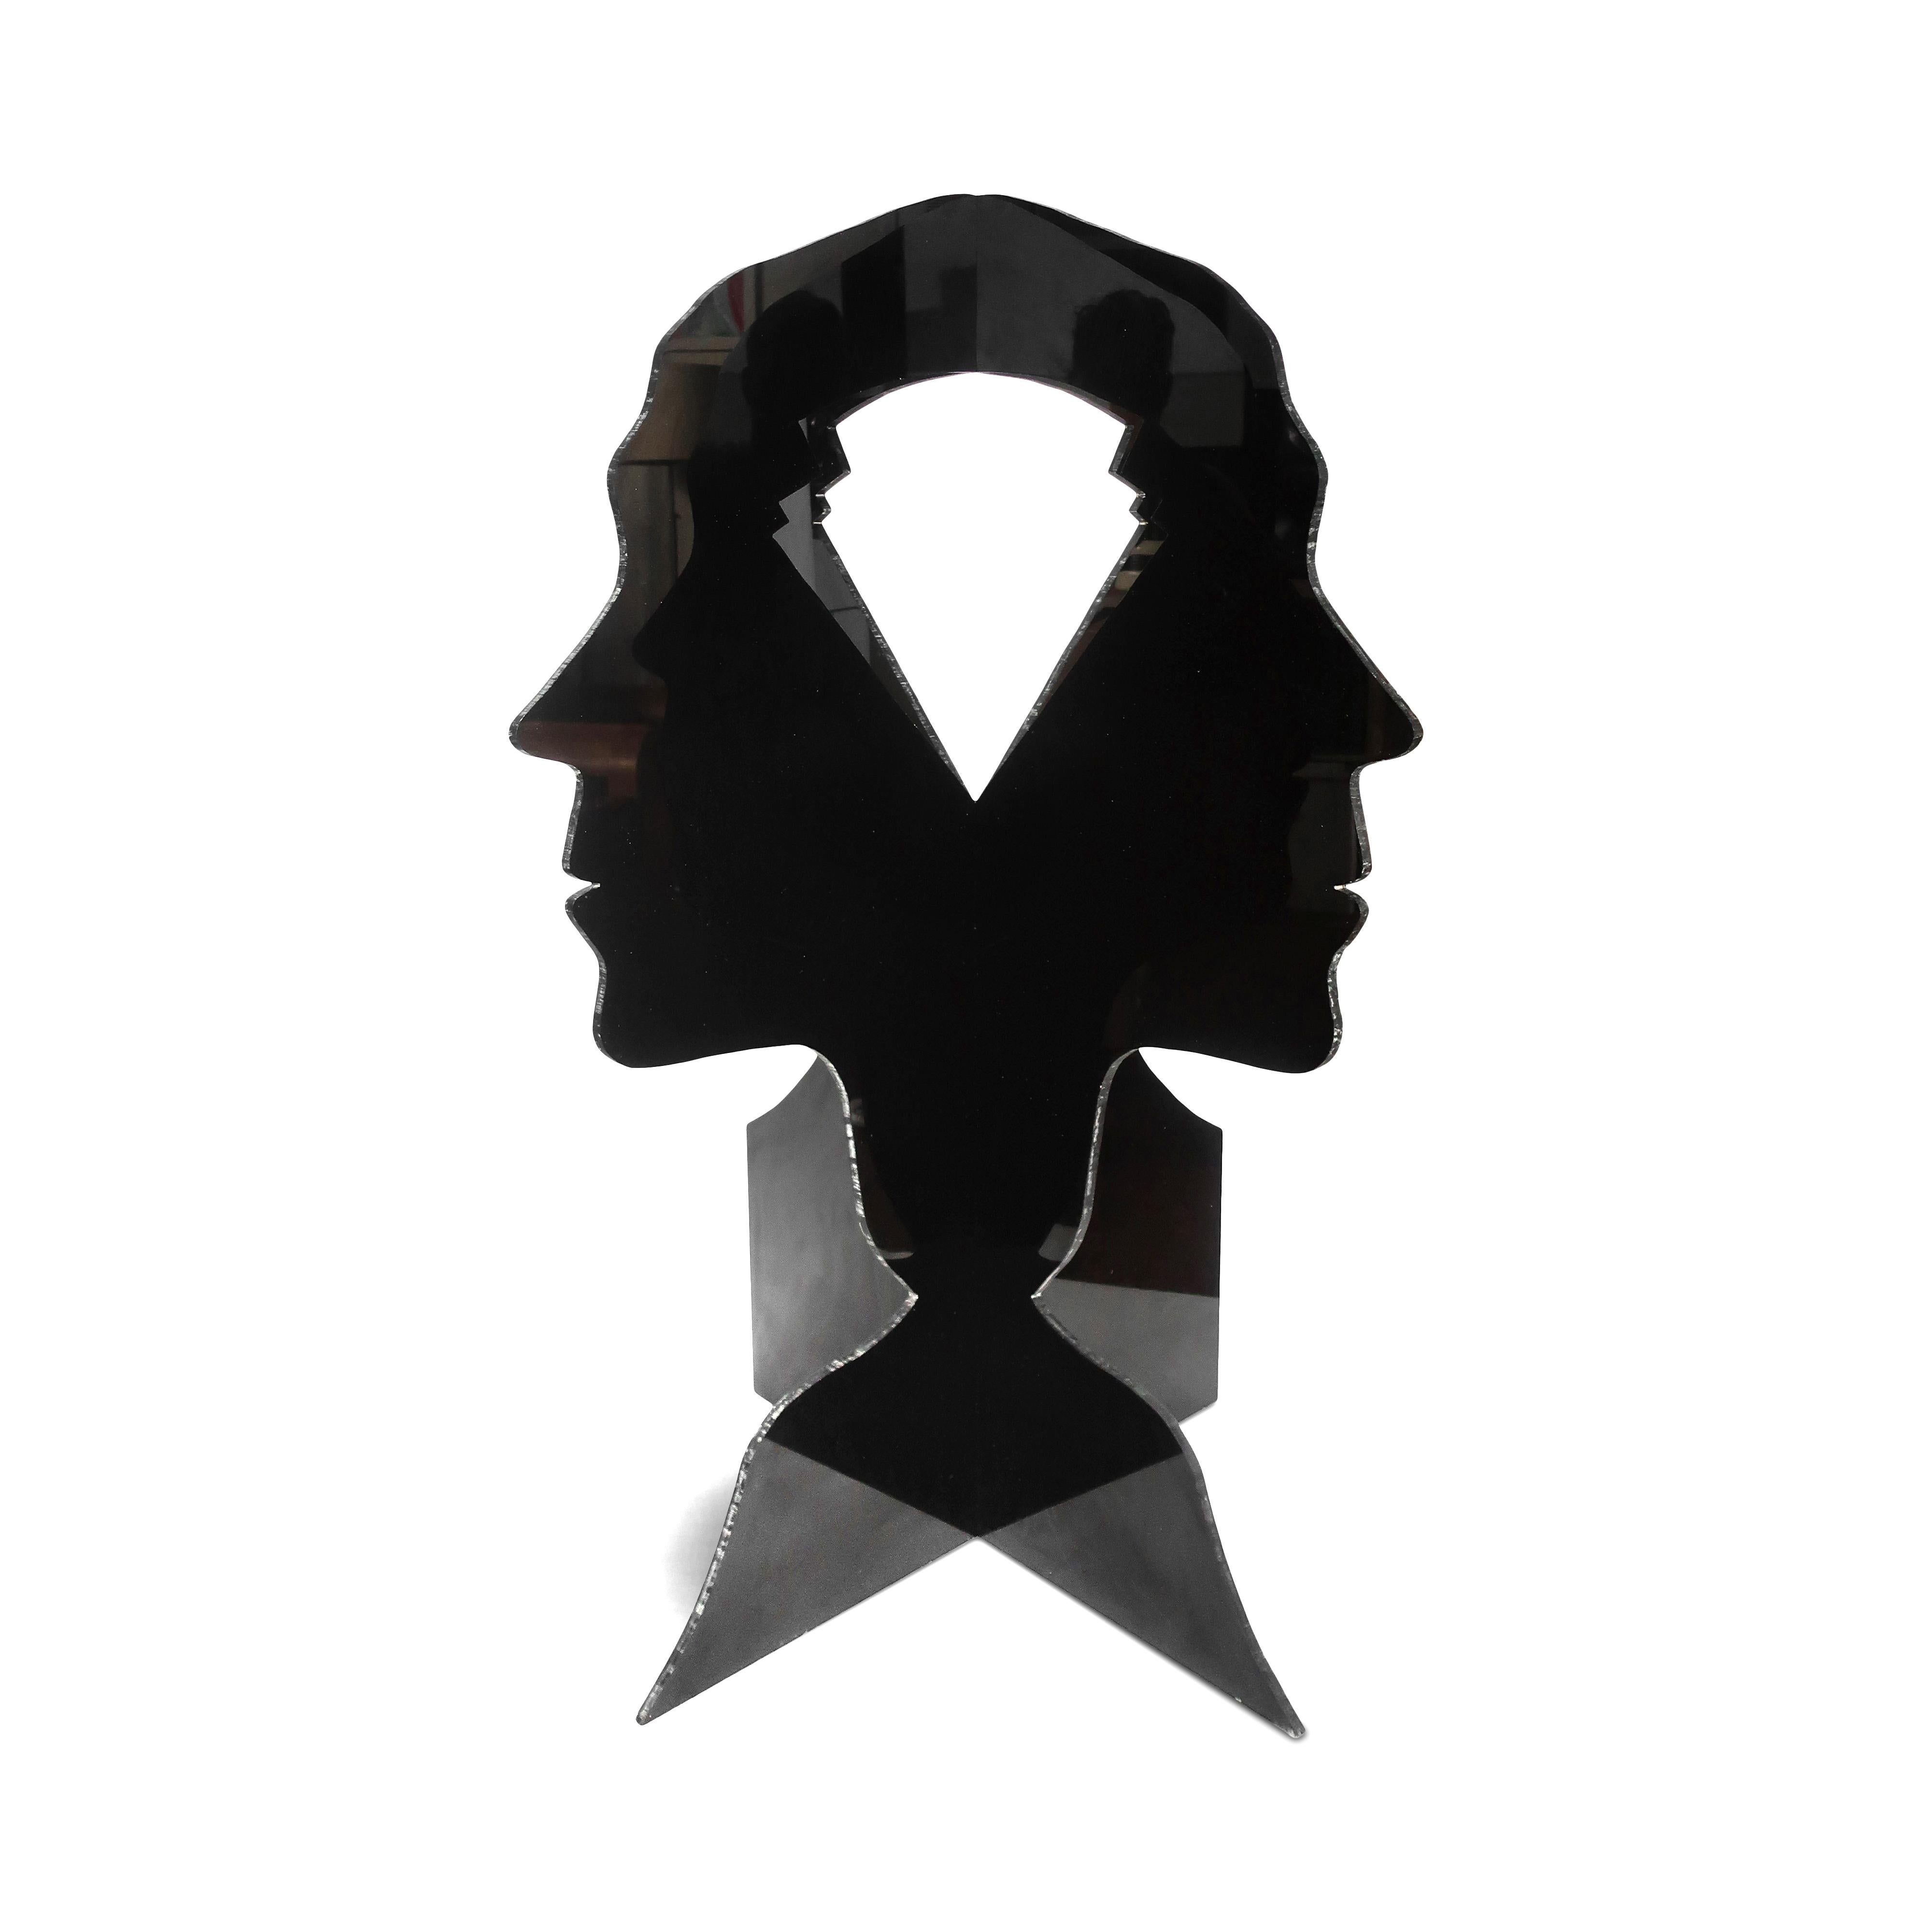 An amazing large three dimensional sculpture of the silhouette of a person’s head, neck, and shoulder constructed from two pieces of black lucite. The two pieces each have a cut out shape where the brain would be which creates yet another three